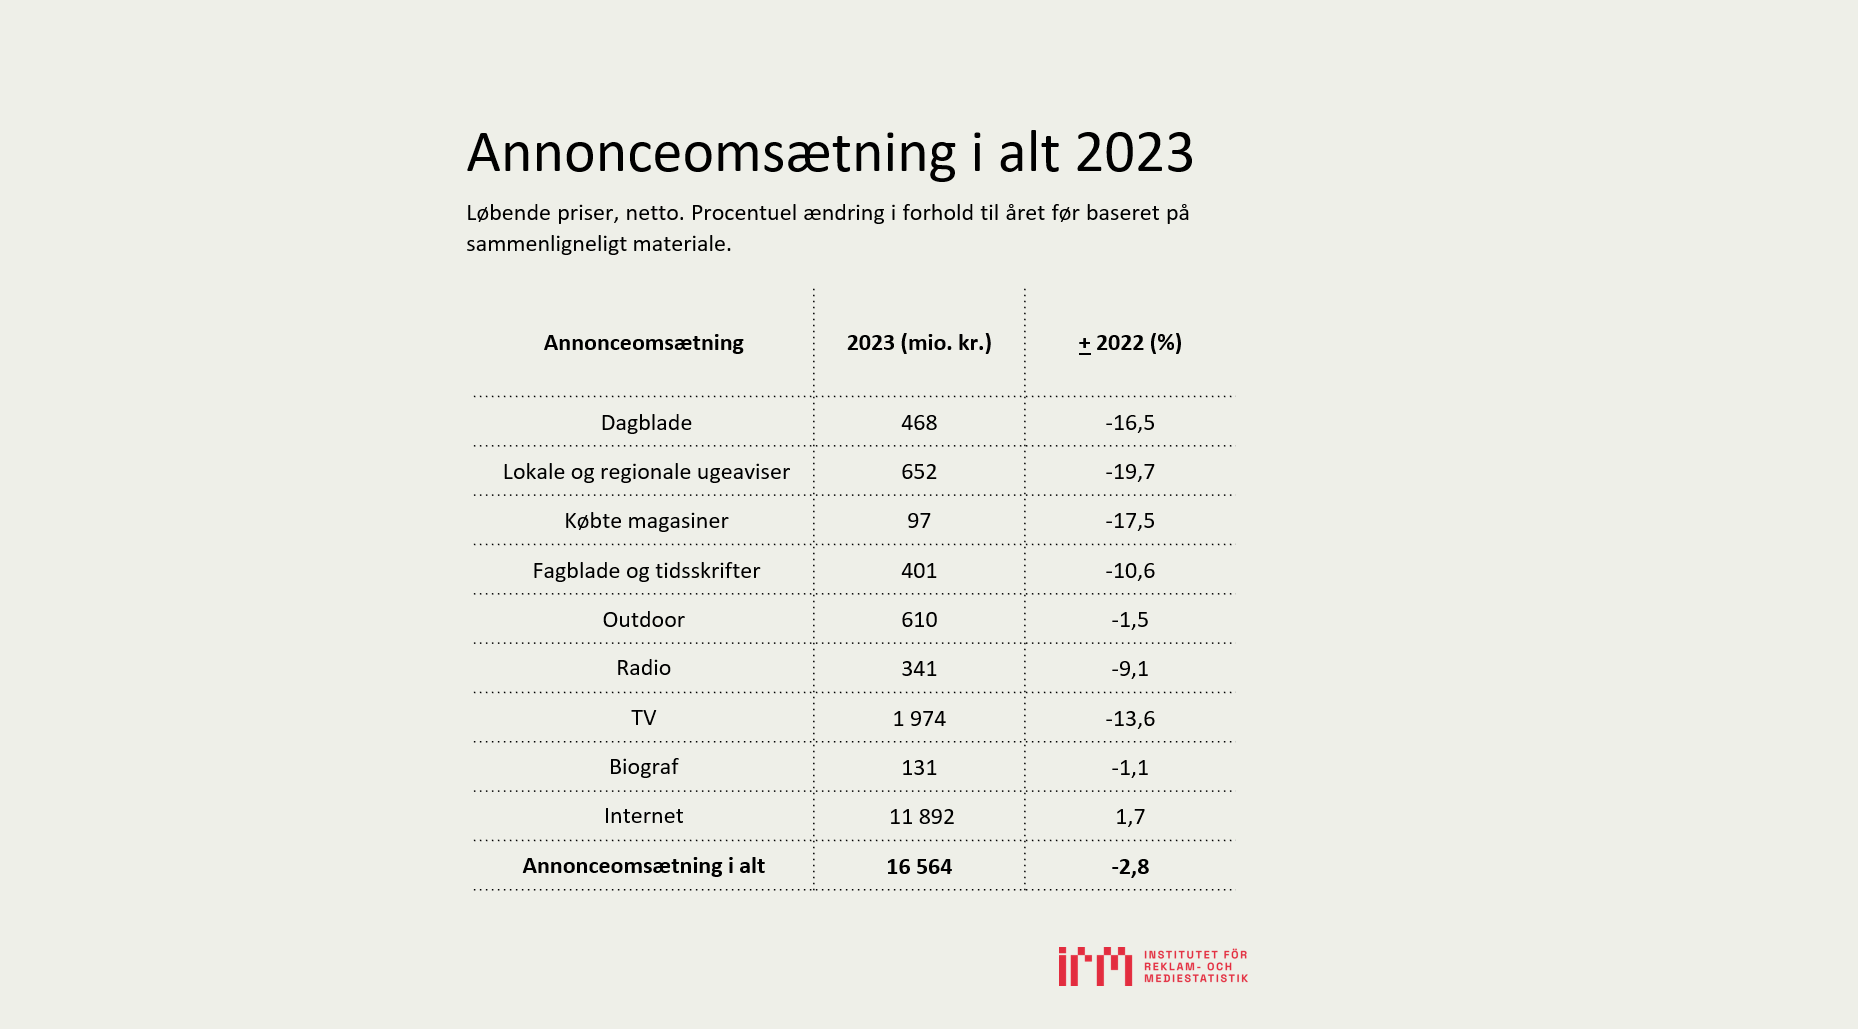 IRM Annonceomsaetning 2023